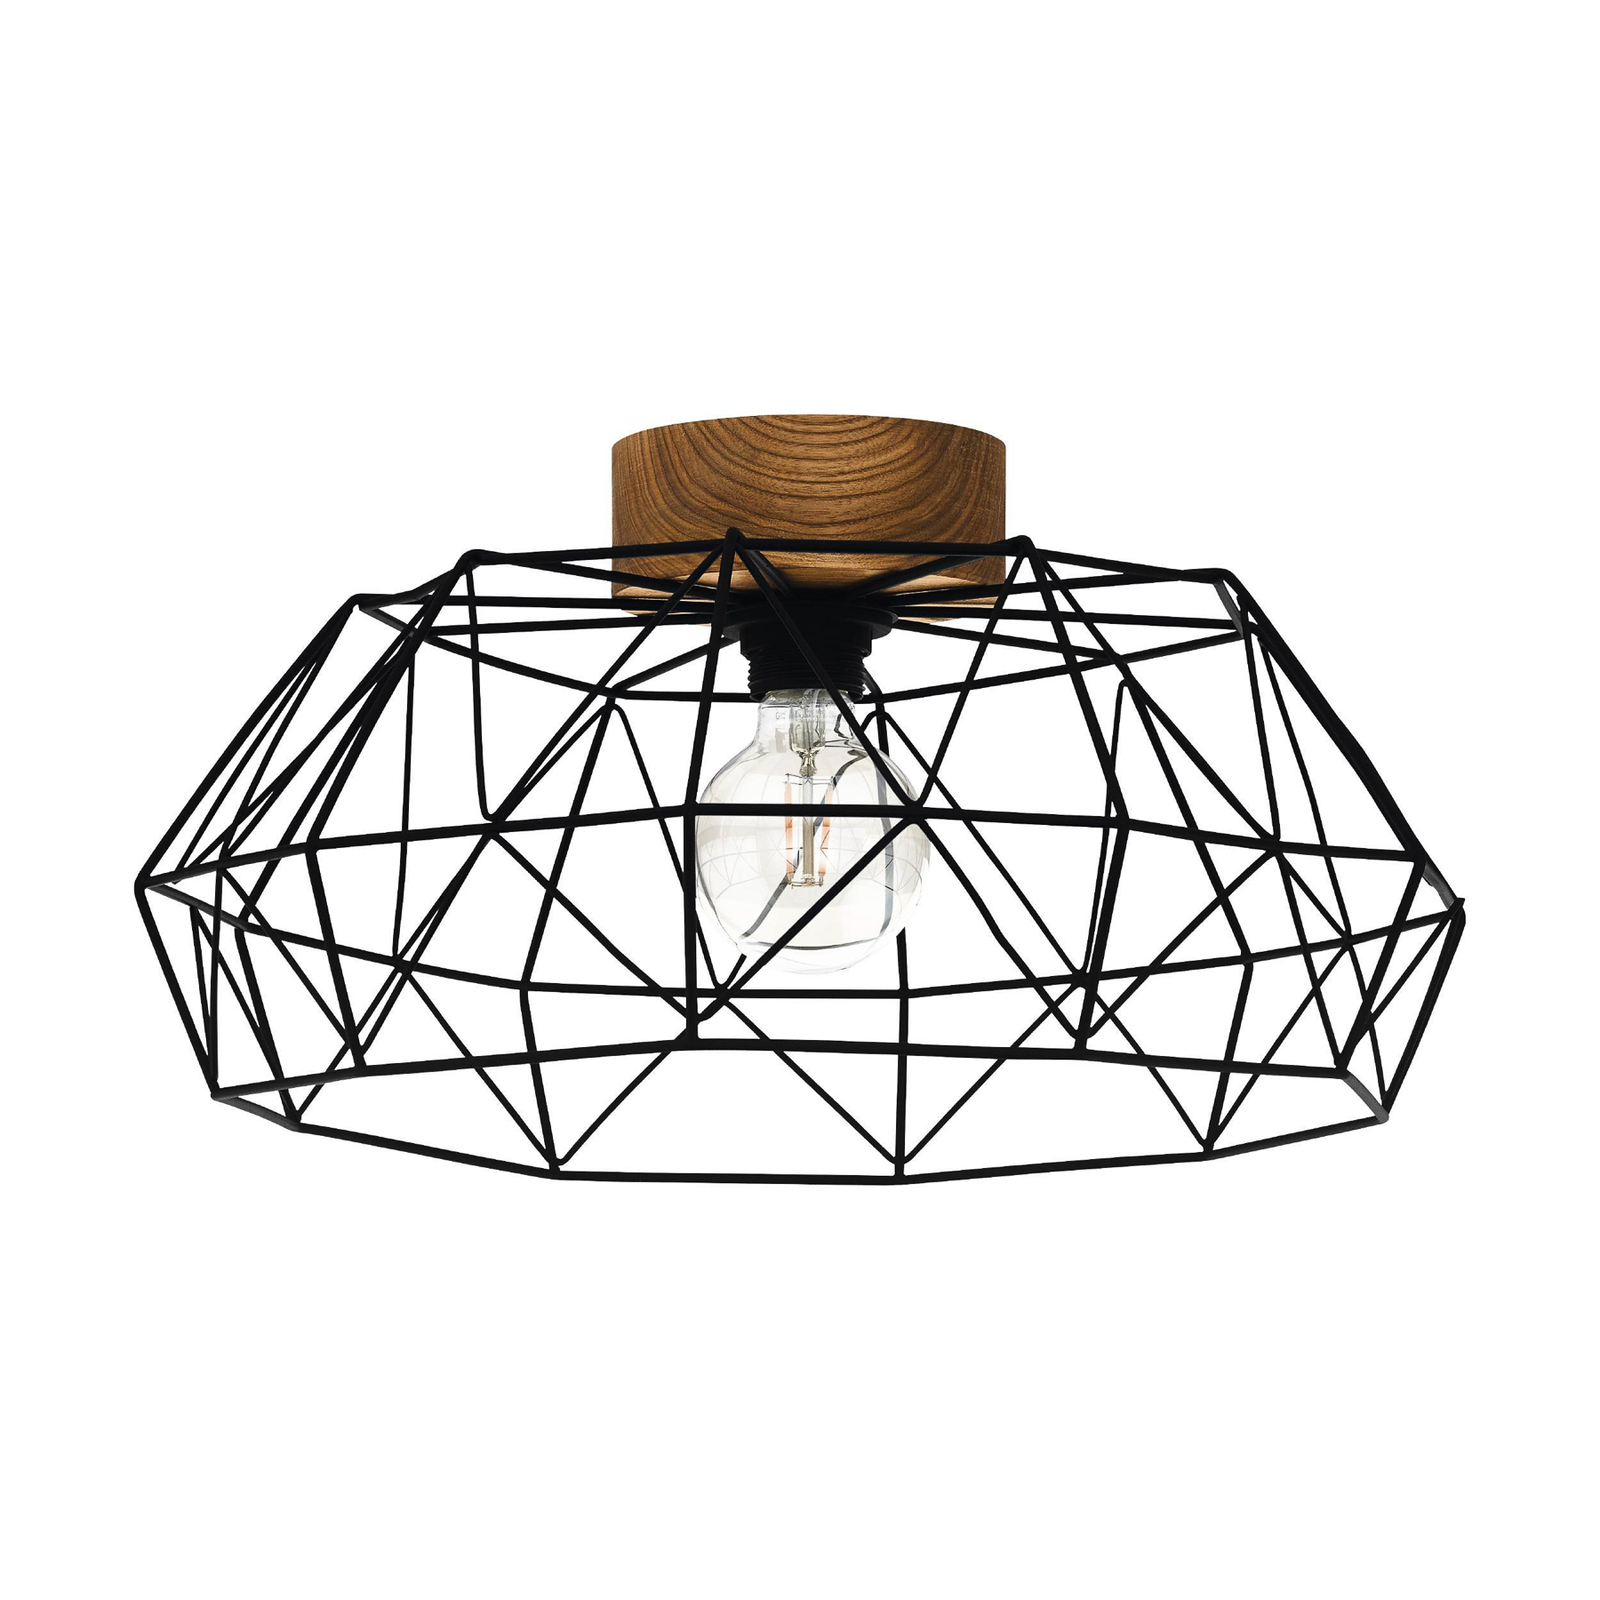 Padstowith ceiling light with a wooden canopy